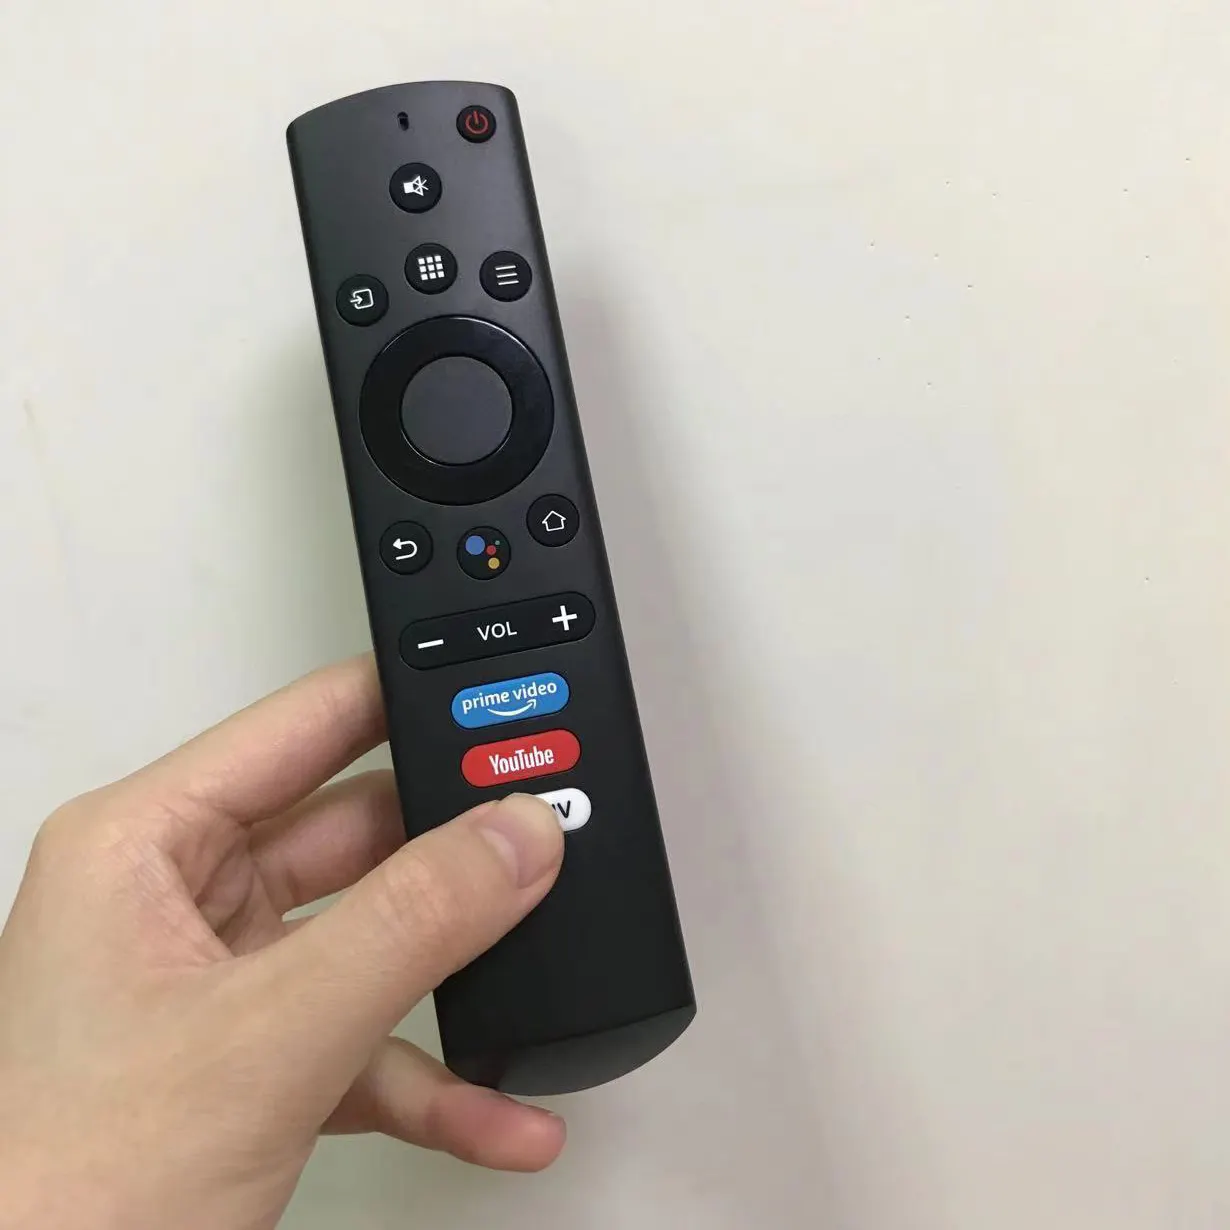 High quality industrial wireless 18key BLE remote control with voice search for android, pc,set top box, smart tv